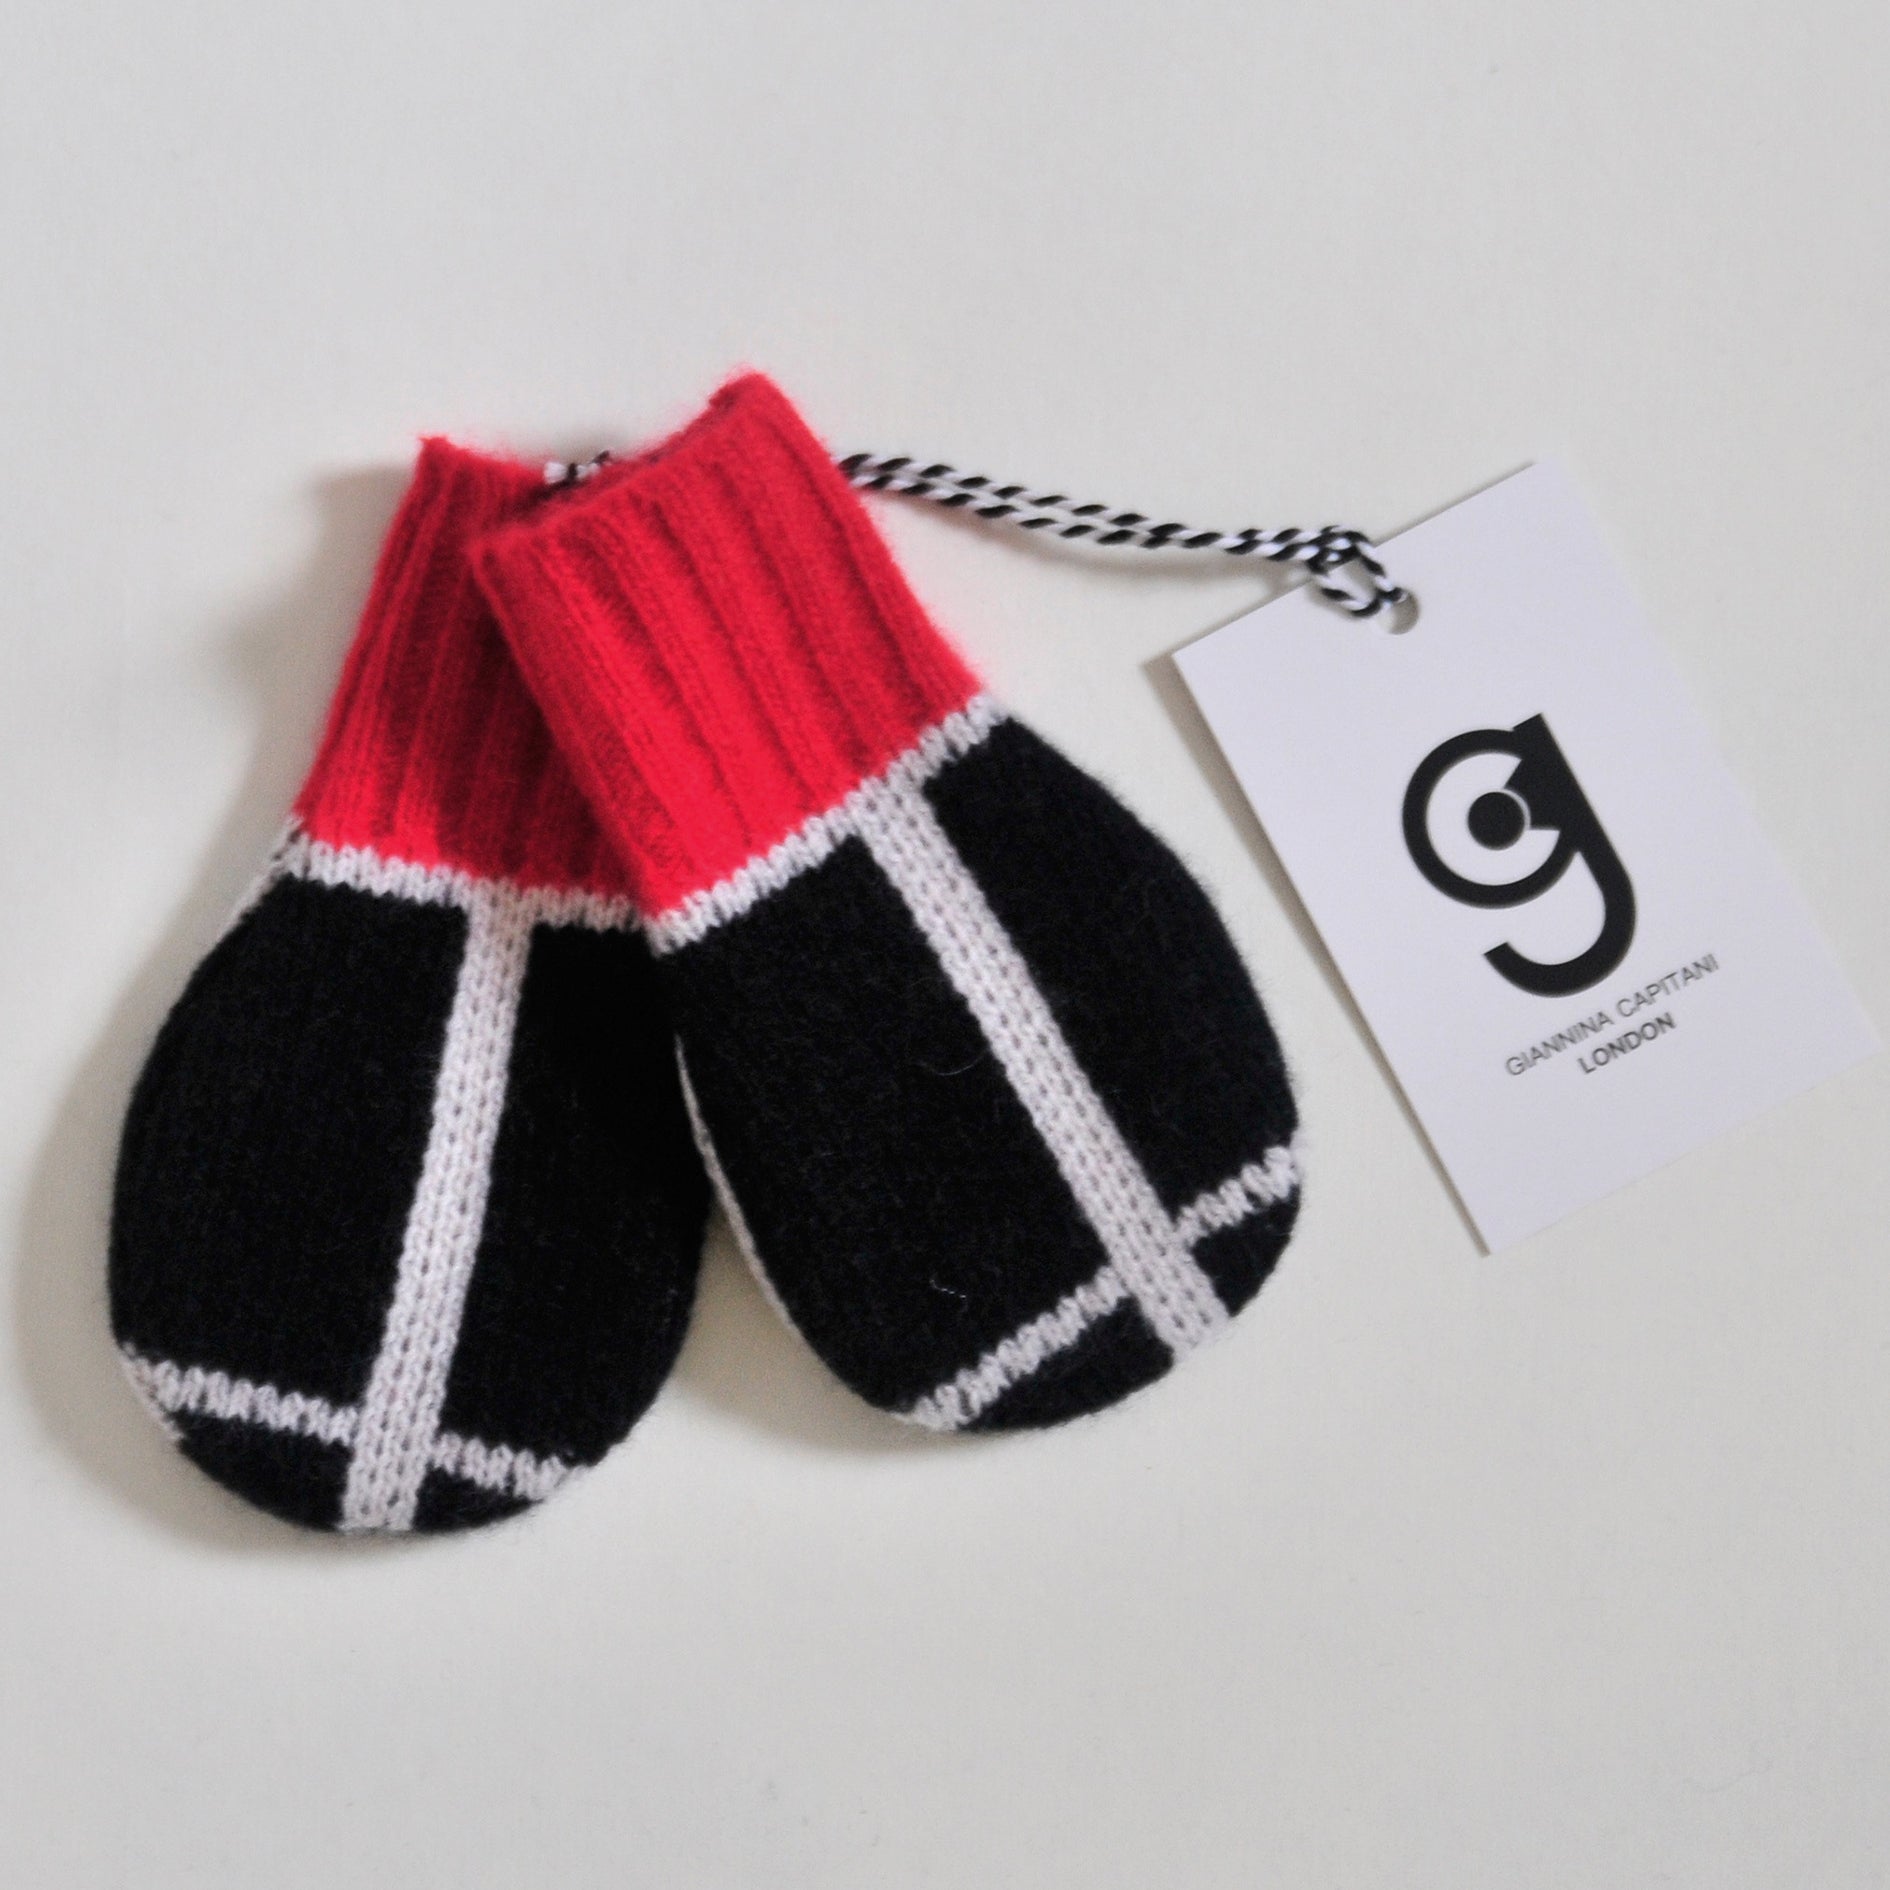 GRID BABY MITTEN IN BLACK AND WHITE